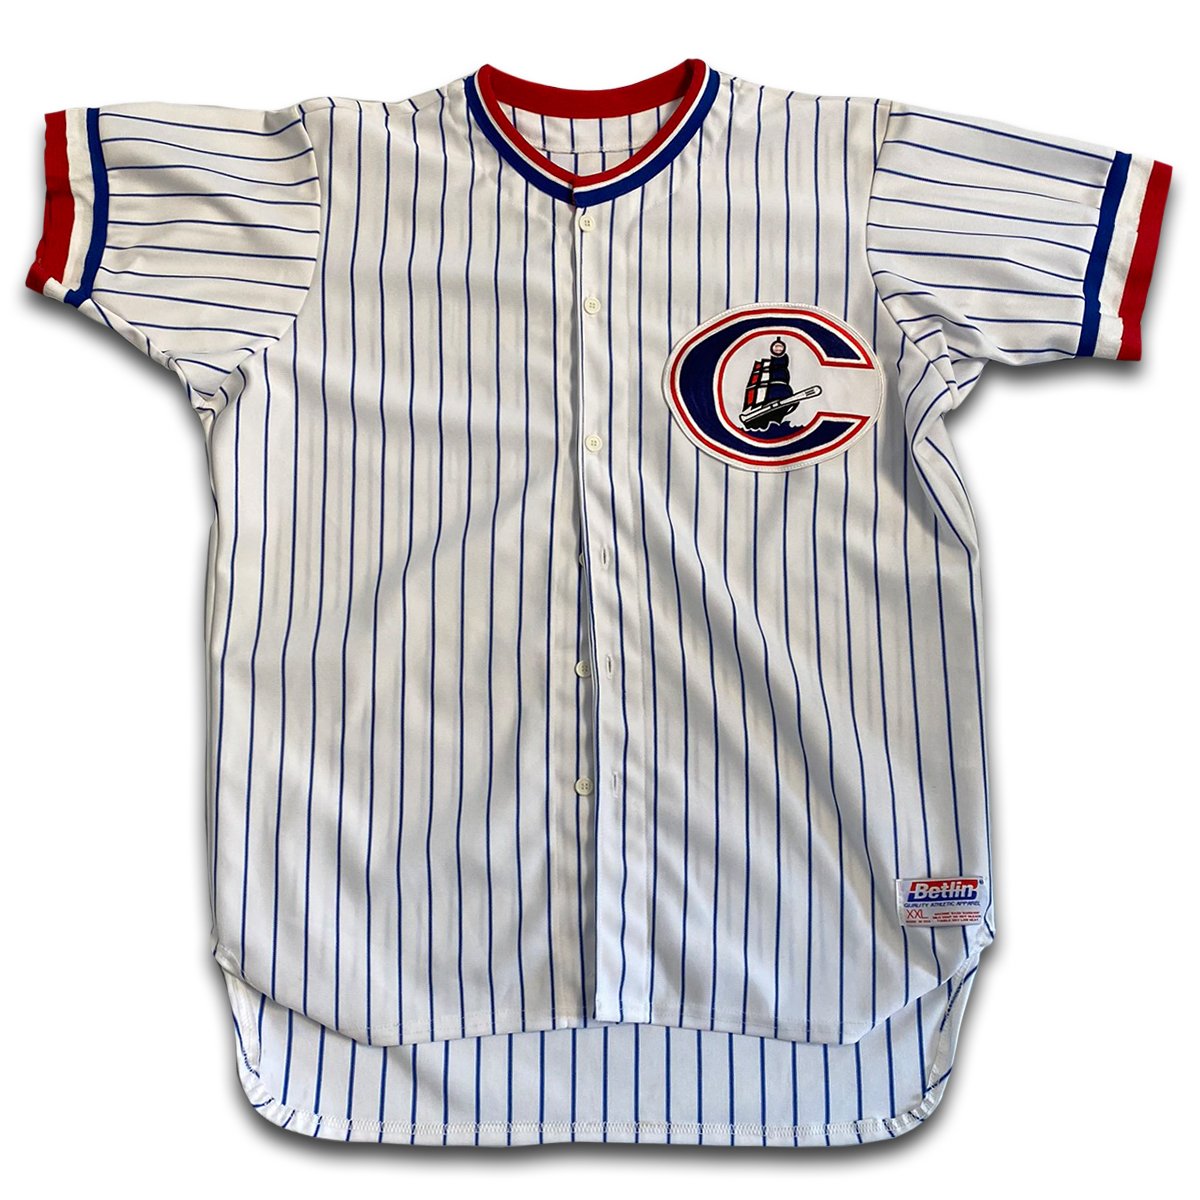 LA Clippers Vintage Jerseys, Clippers Retro Jersey